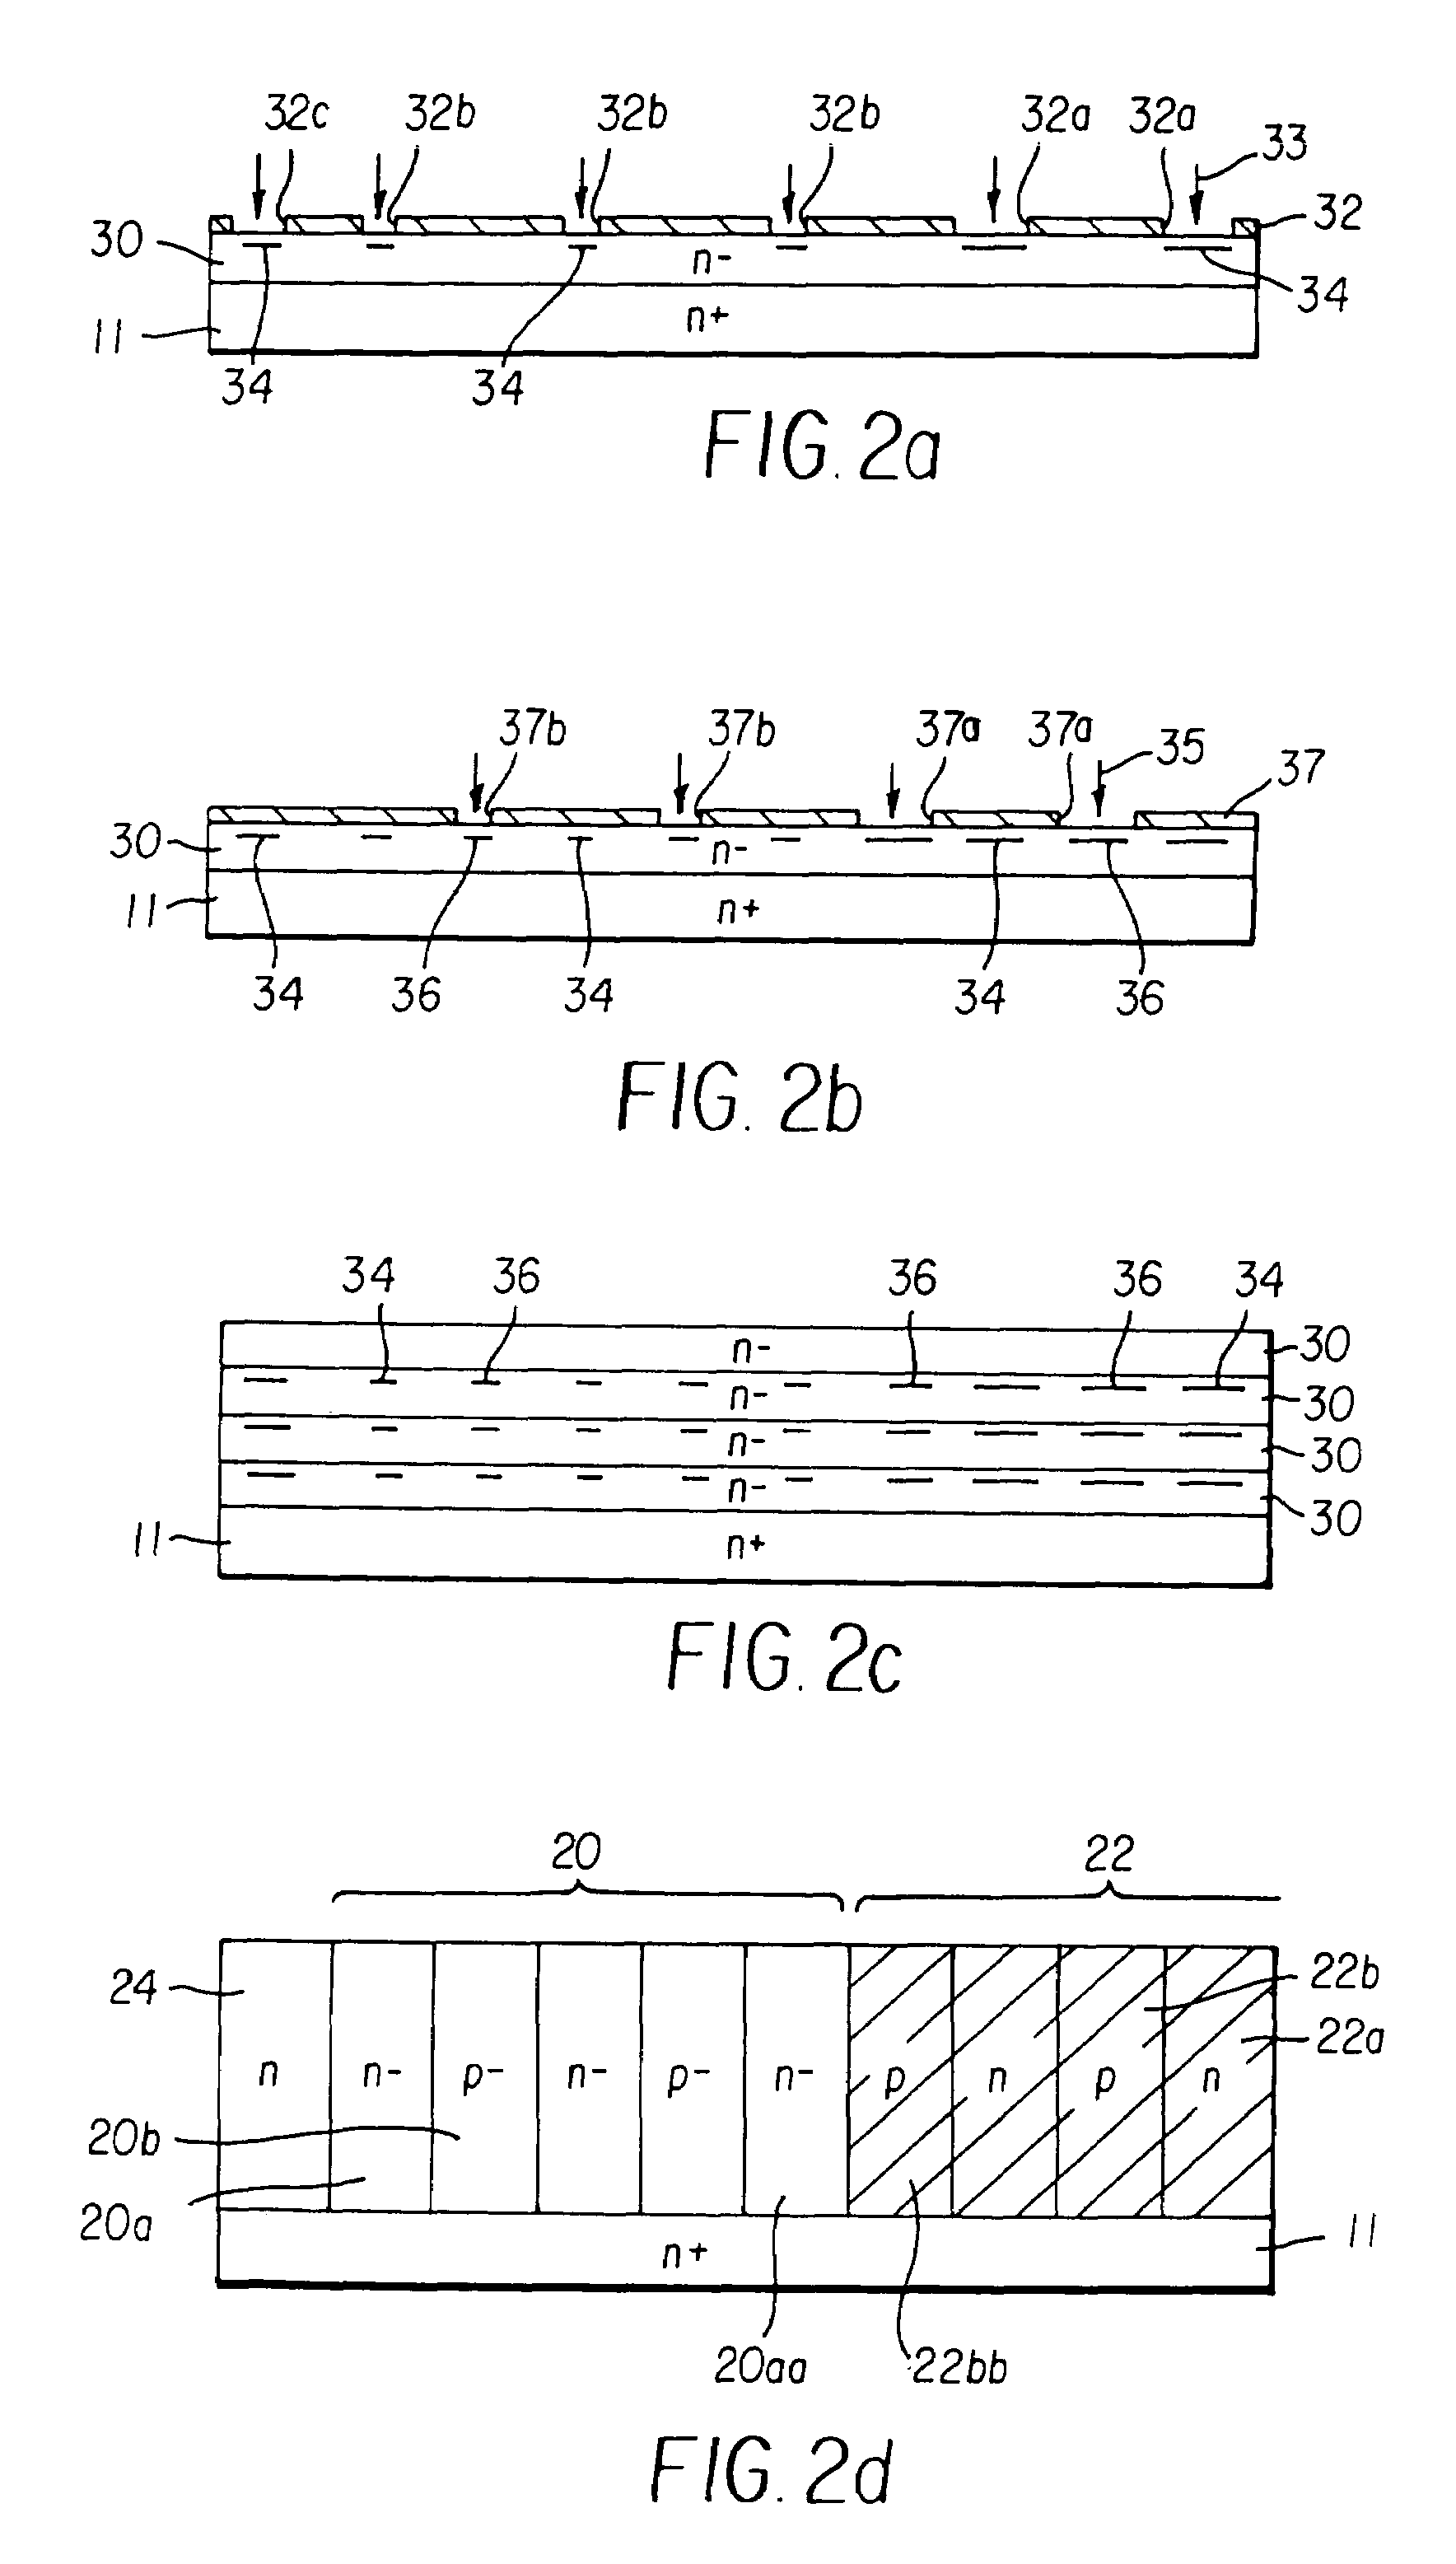 Super-junction semiconductor device and method of manufacturing the same